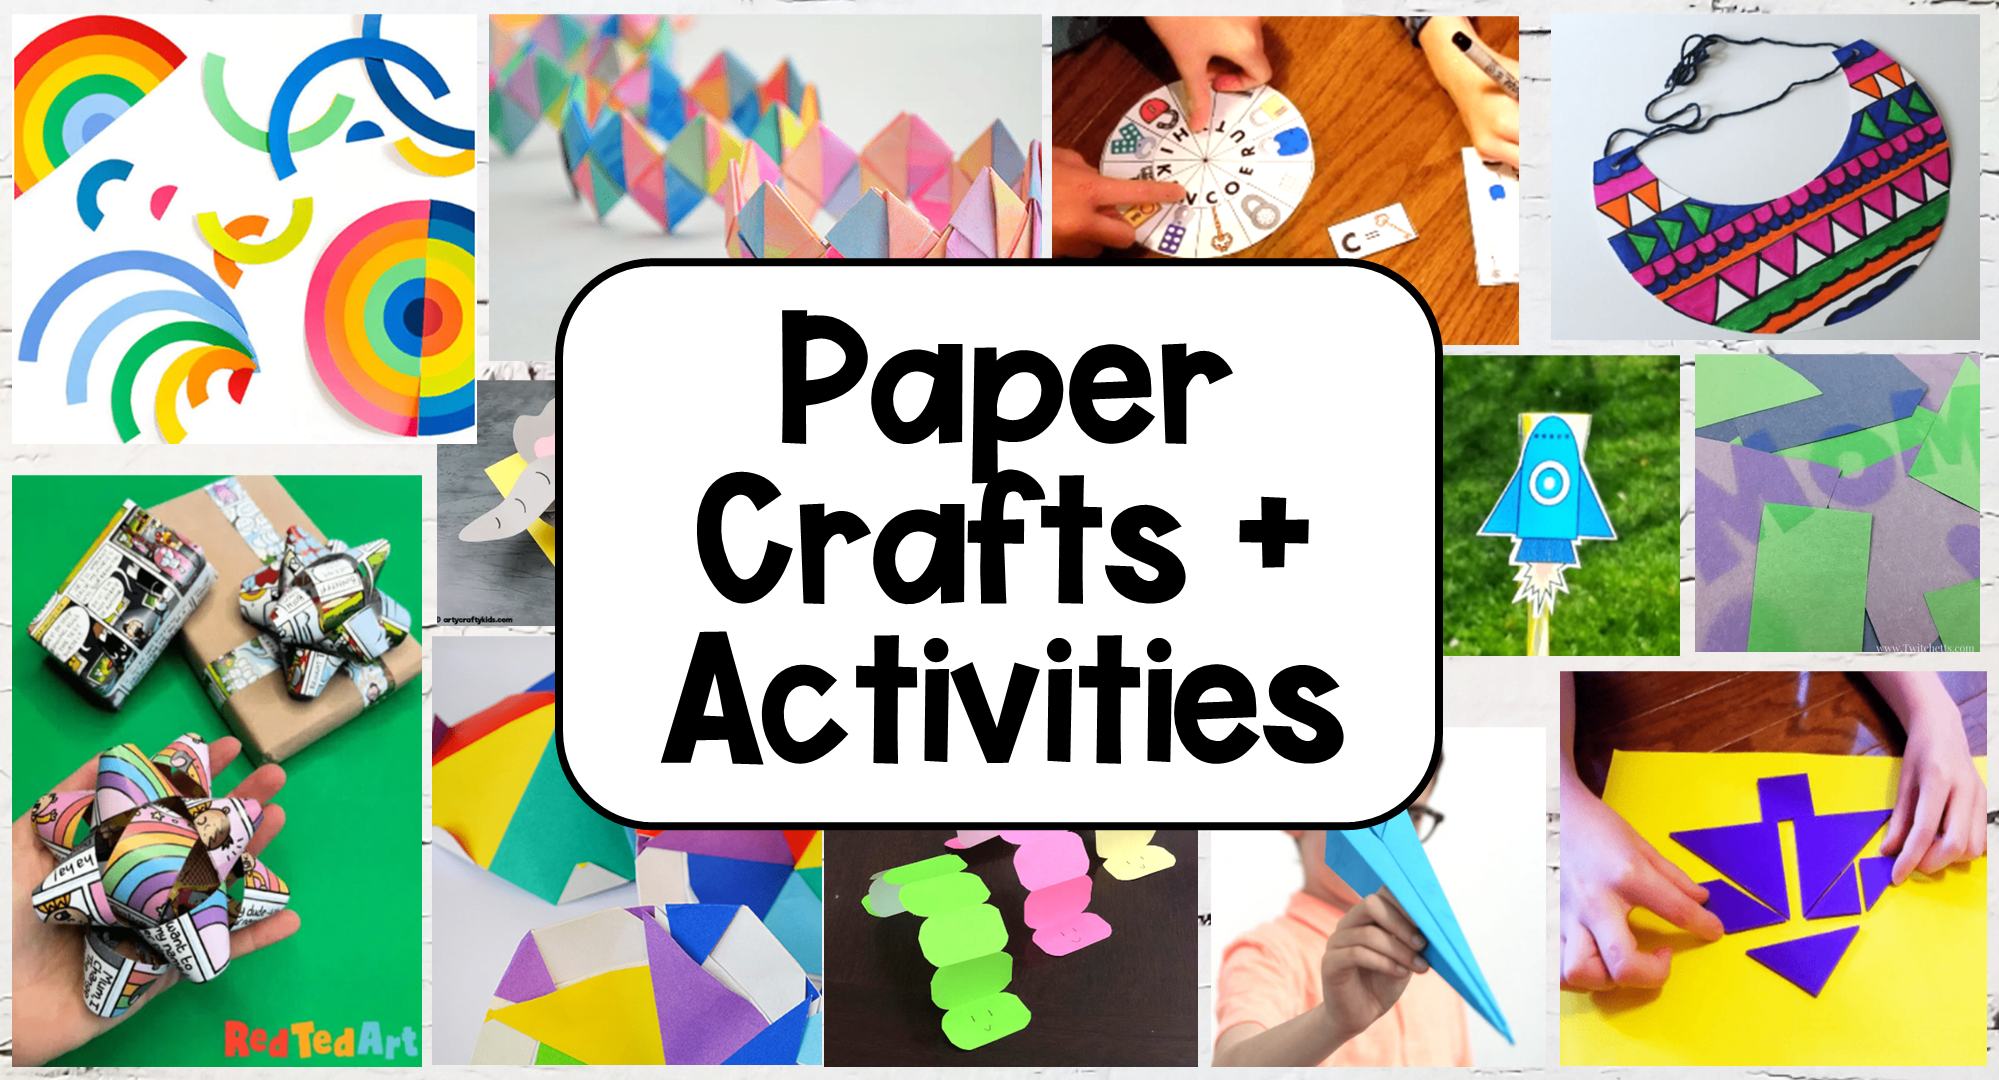 Simple Paper Strip Craft Ideas for Kids  Crafts, Arts and crafts for kids,  Easy paper crafts